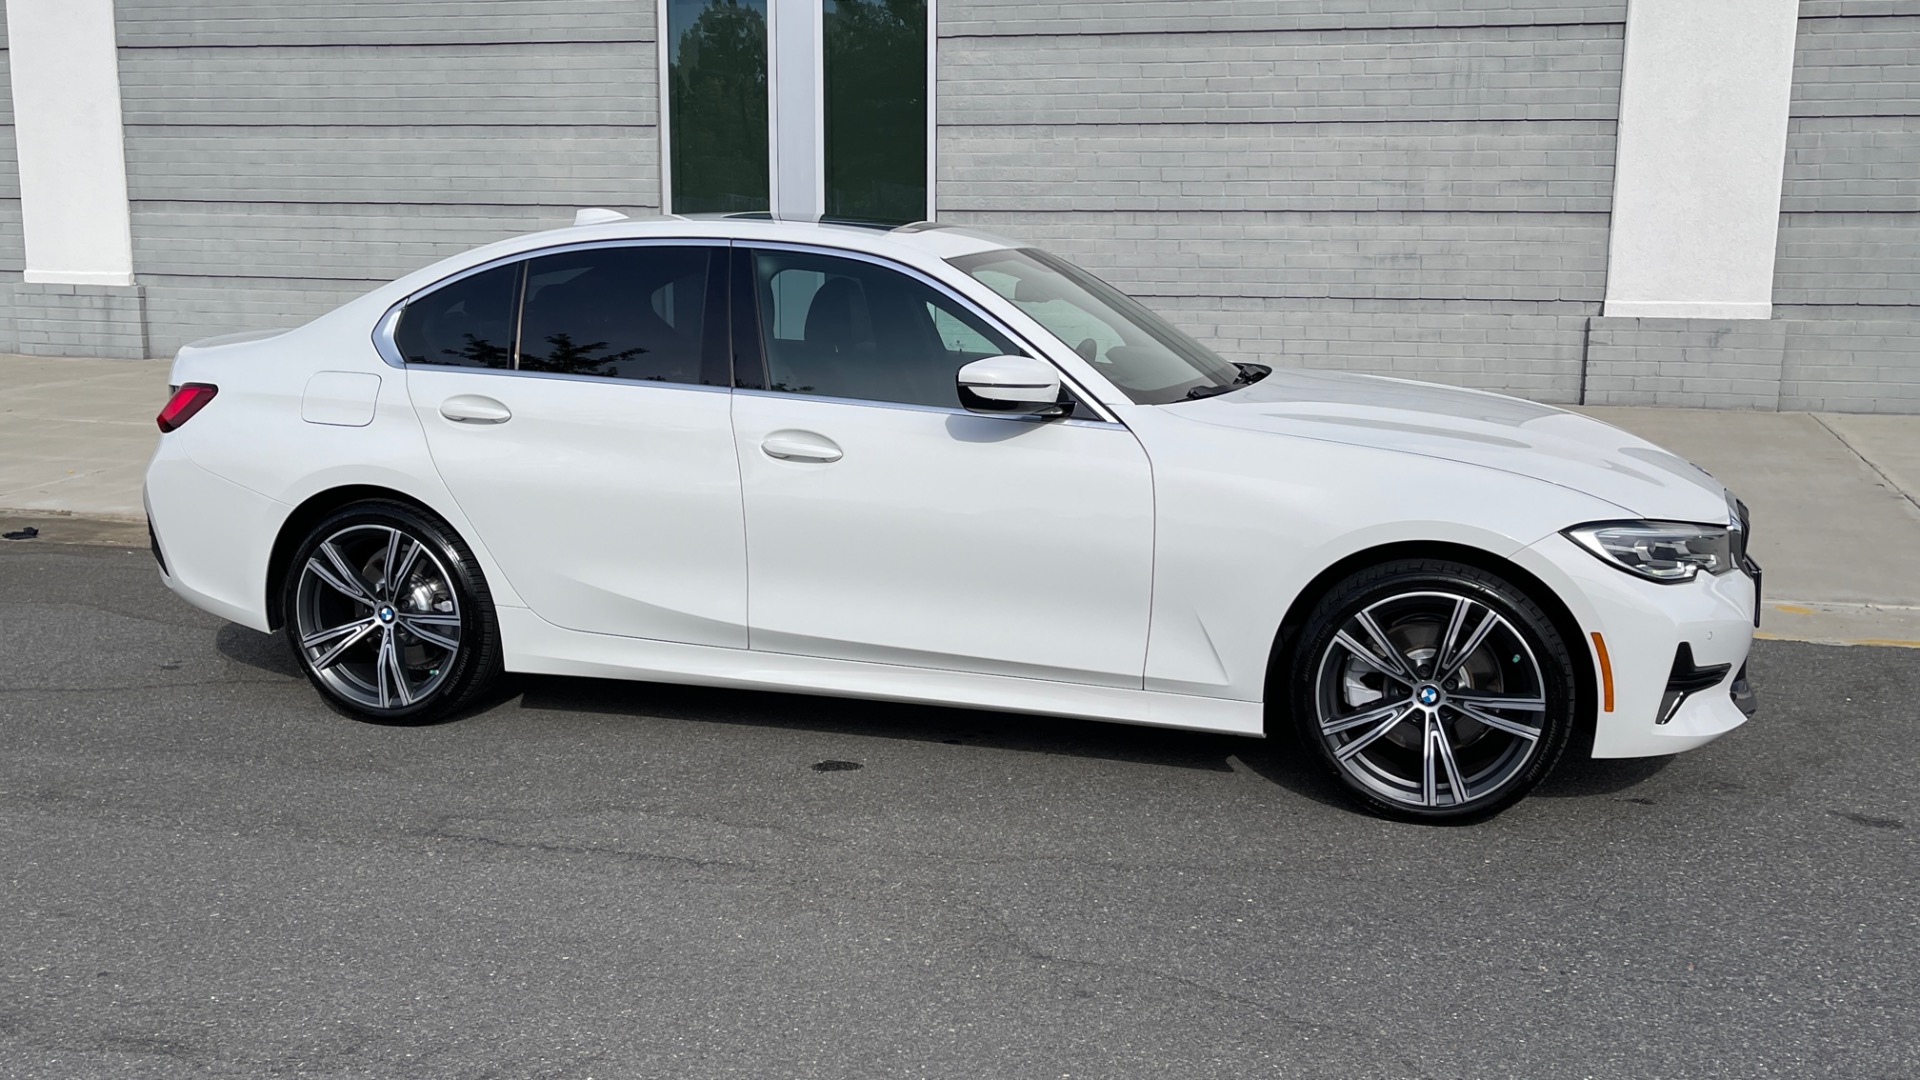 Used 2020 BMW 3 Series 330i xDrive / CONVENIENCE PACKAGE / HEATED STEERING / 19IN WHEELS / KEYLESS for sale Sold at Formula Imports in Charlotte NC 28227 6